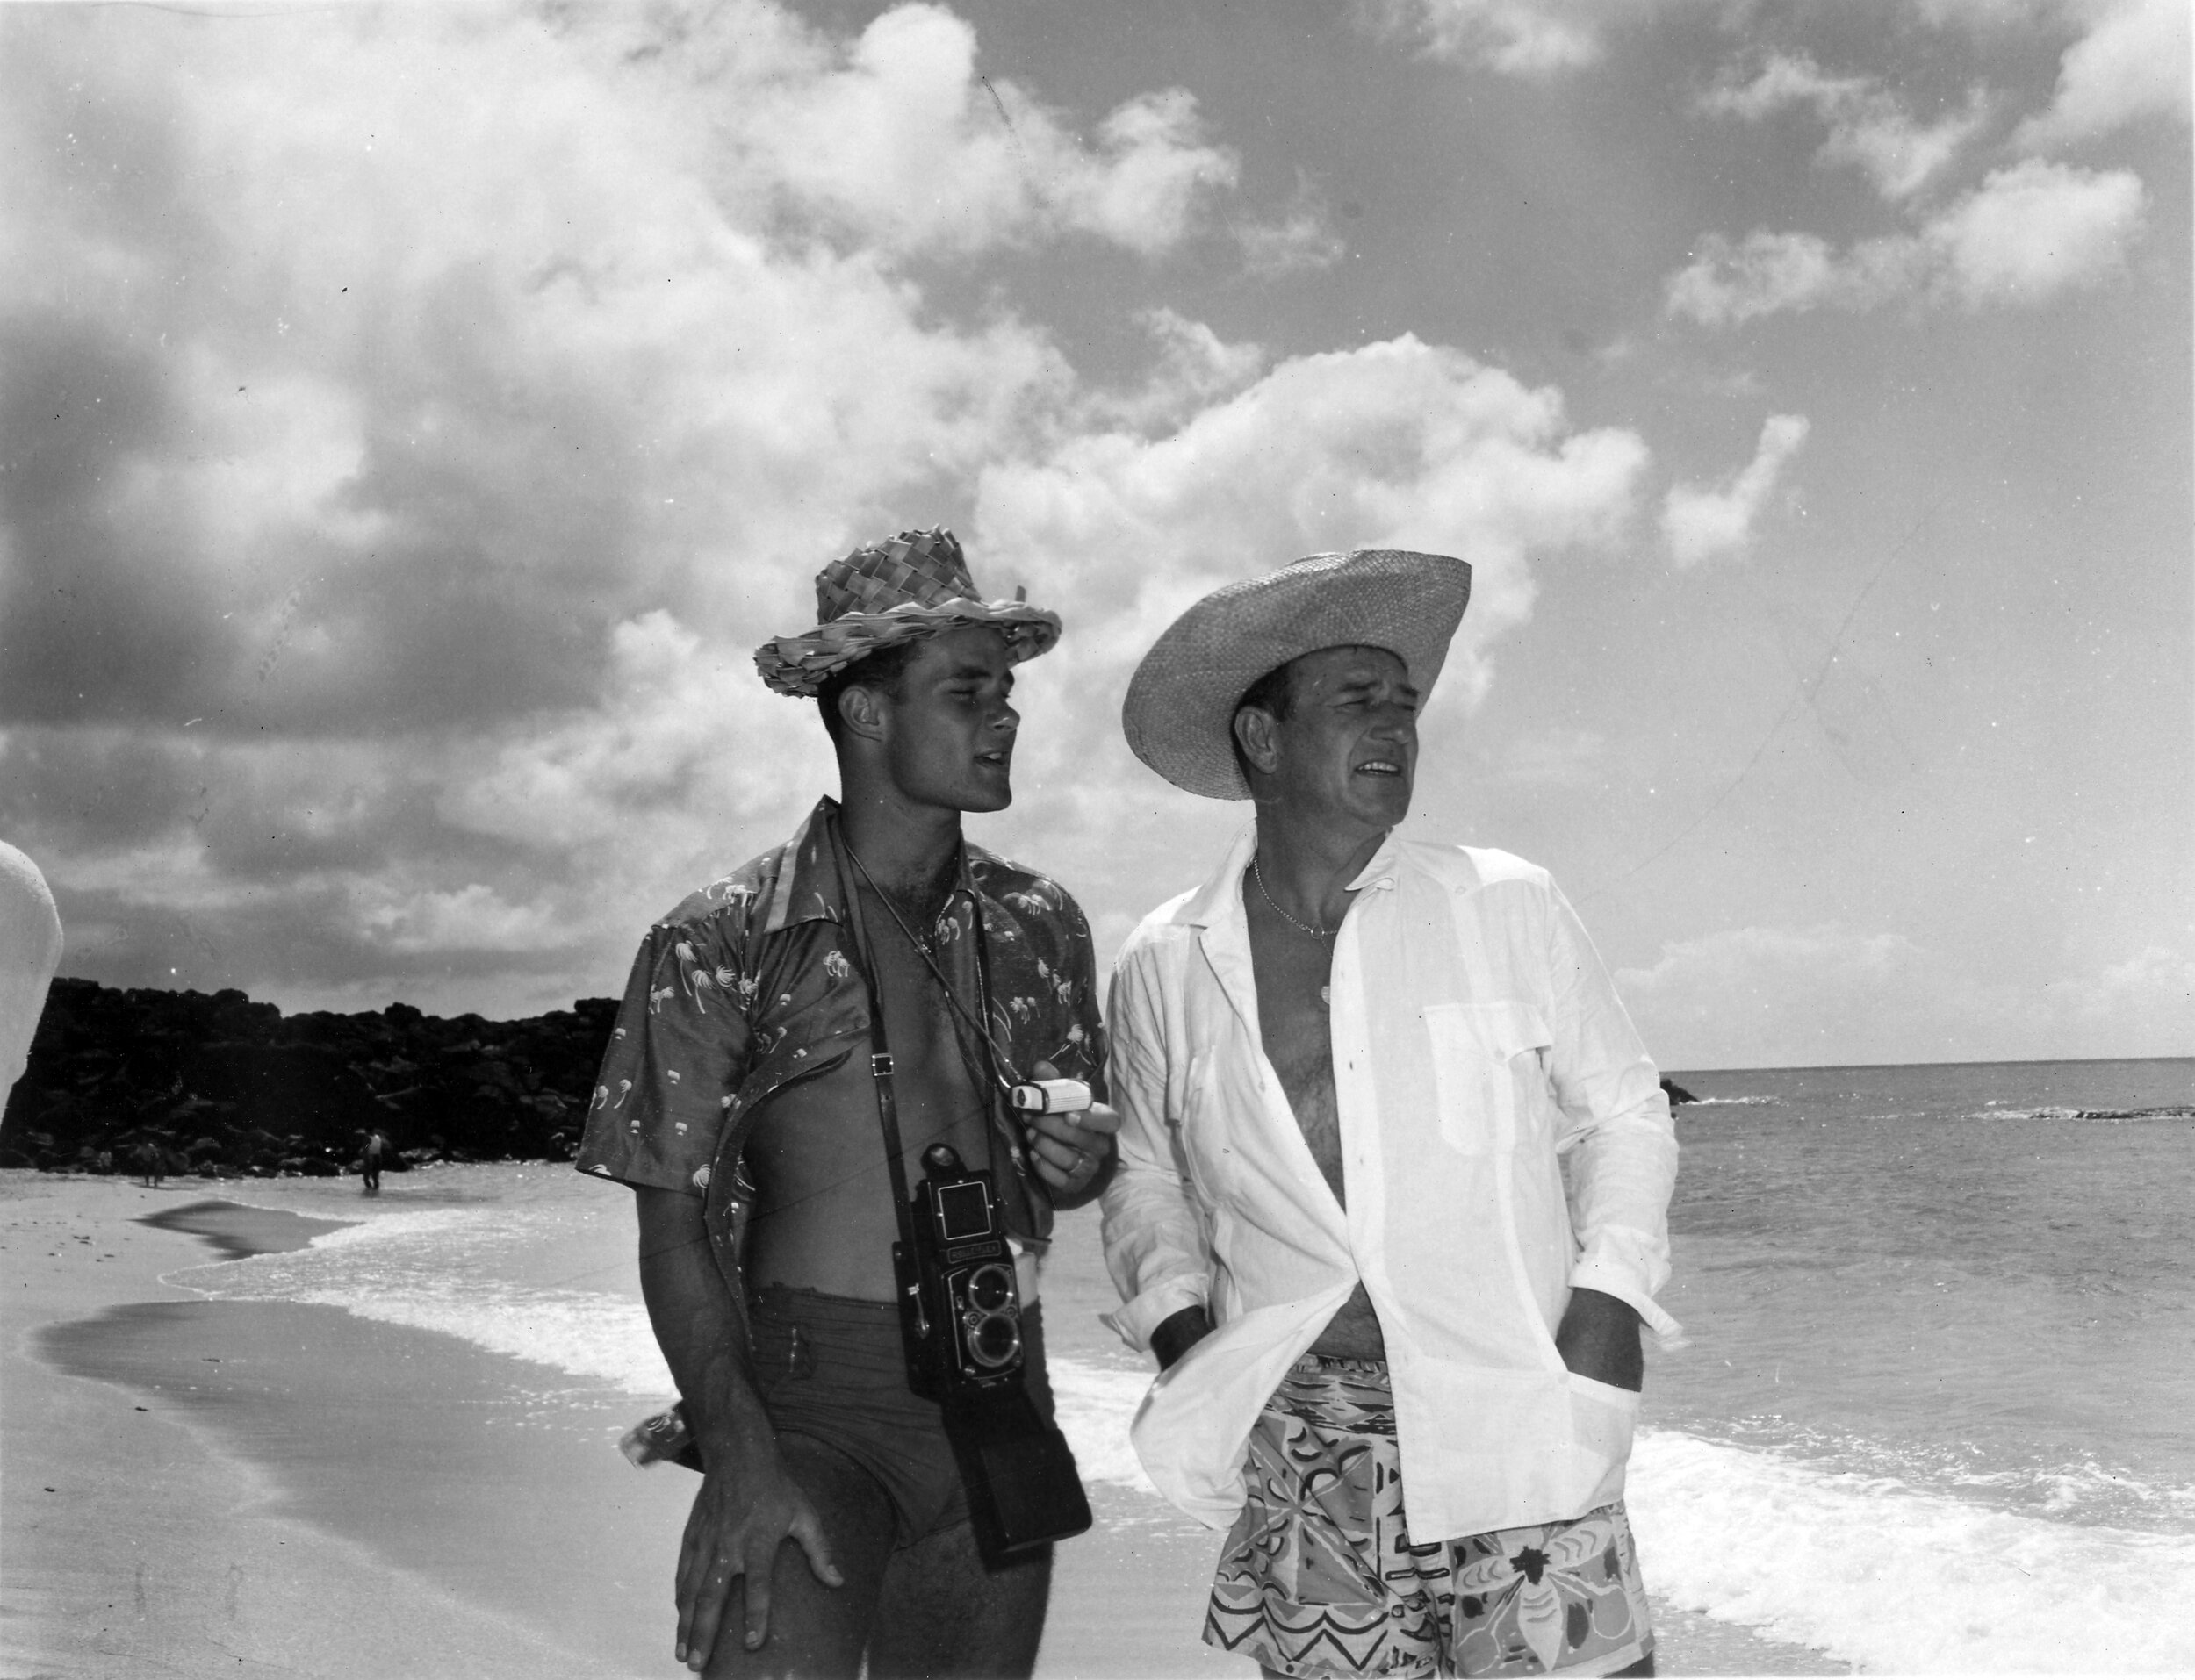 Michael with his Dad on the beach in Hawaii.